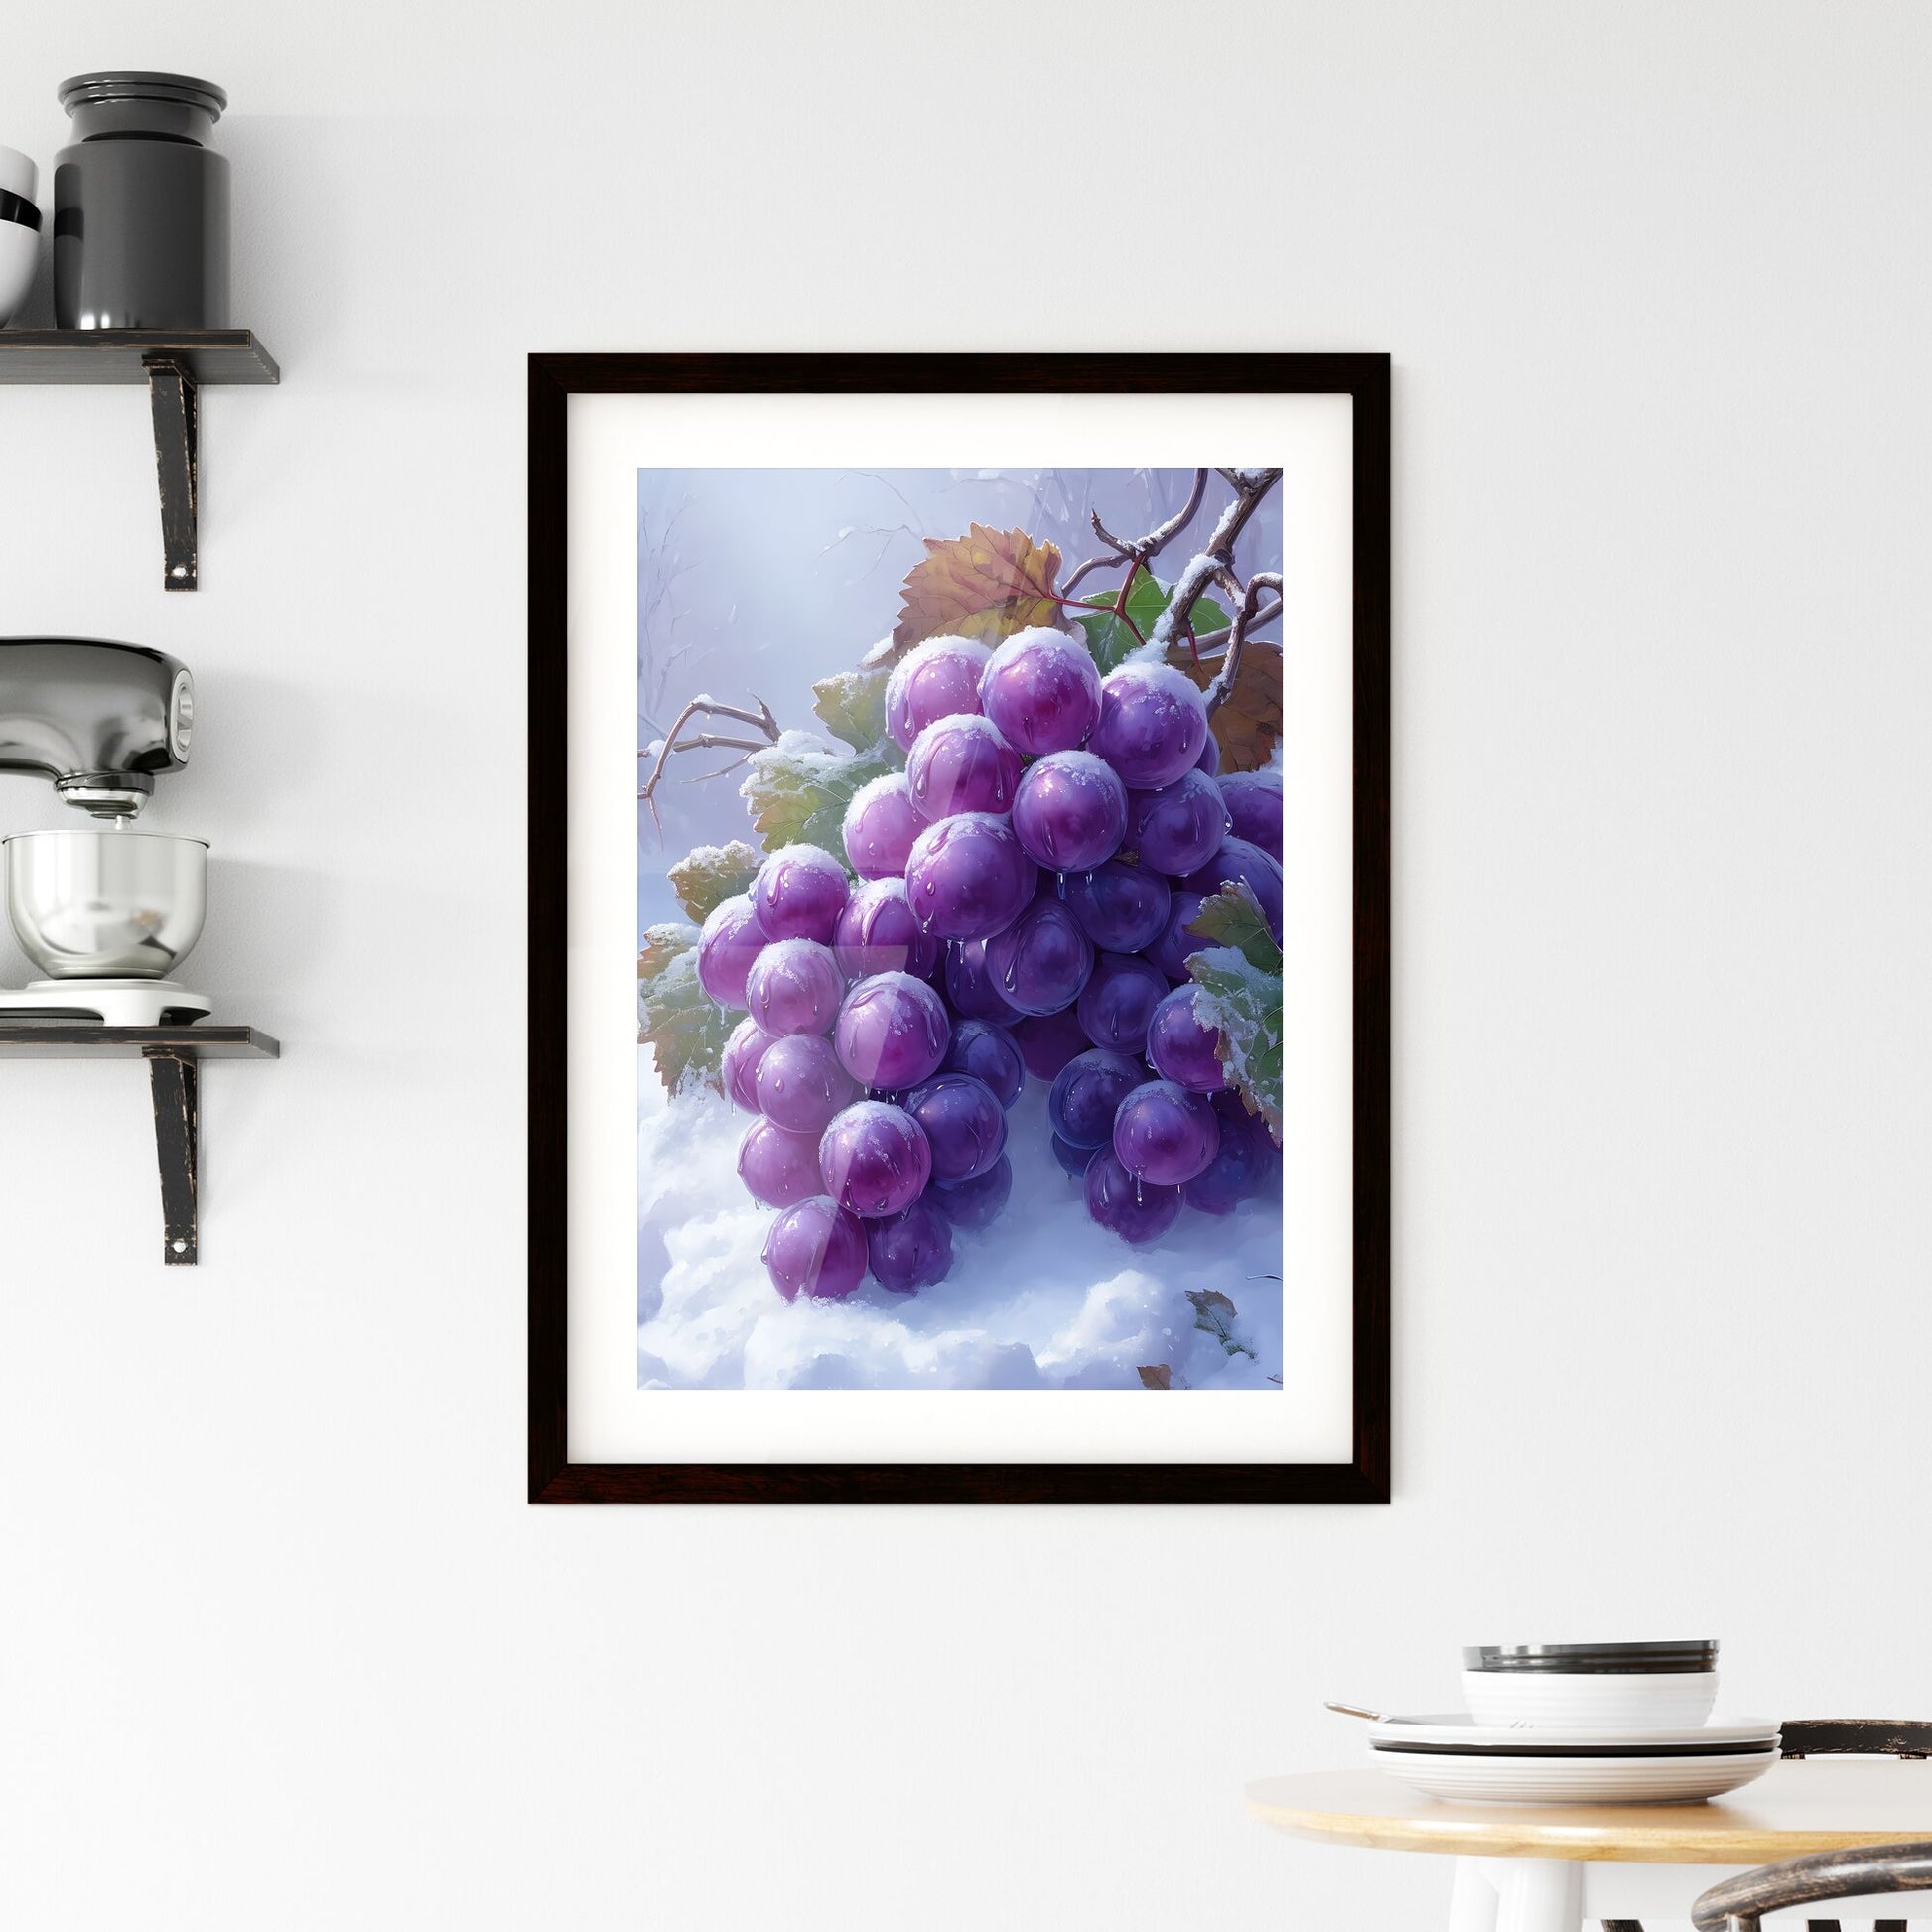 A bunch of purple grapes covered in snow - Art print of a bunch of grapes in the snow Default Title